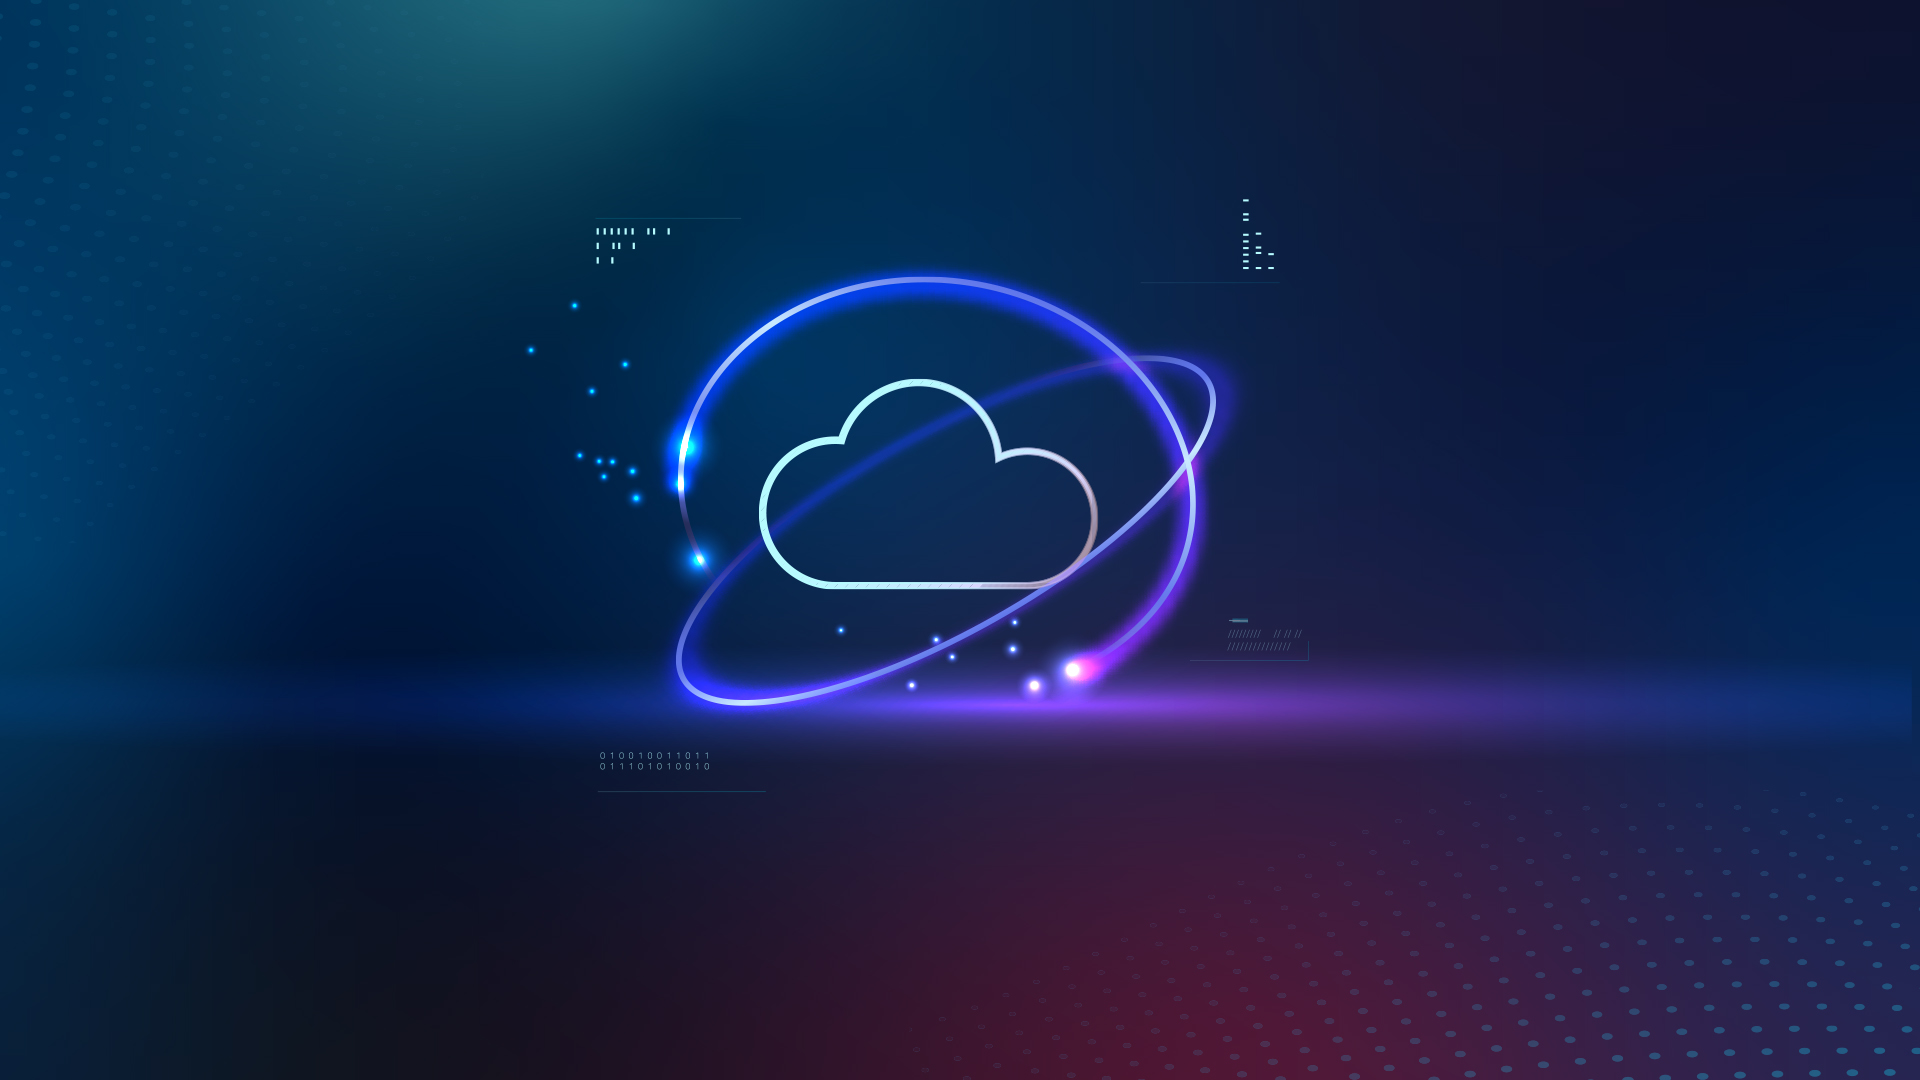 What is Cloud Computing? What Benefits Does It Provide?